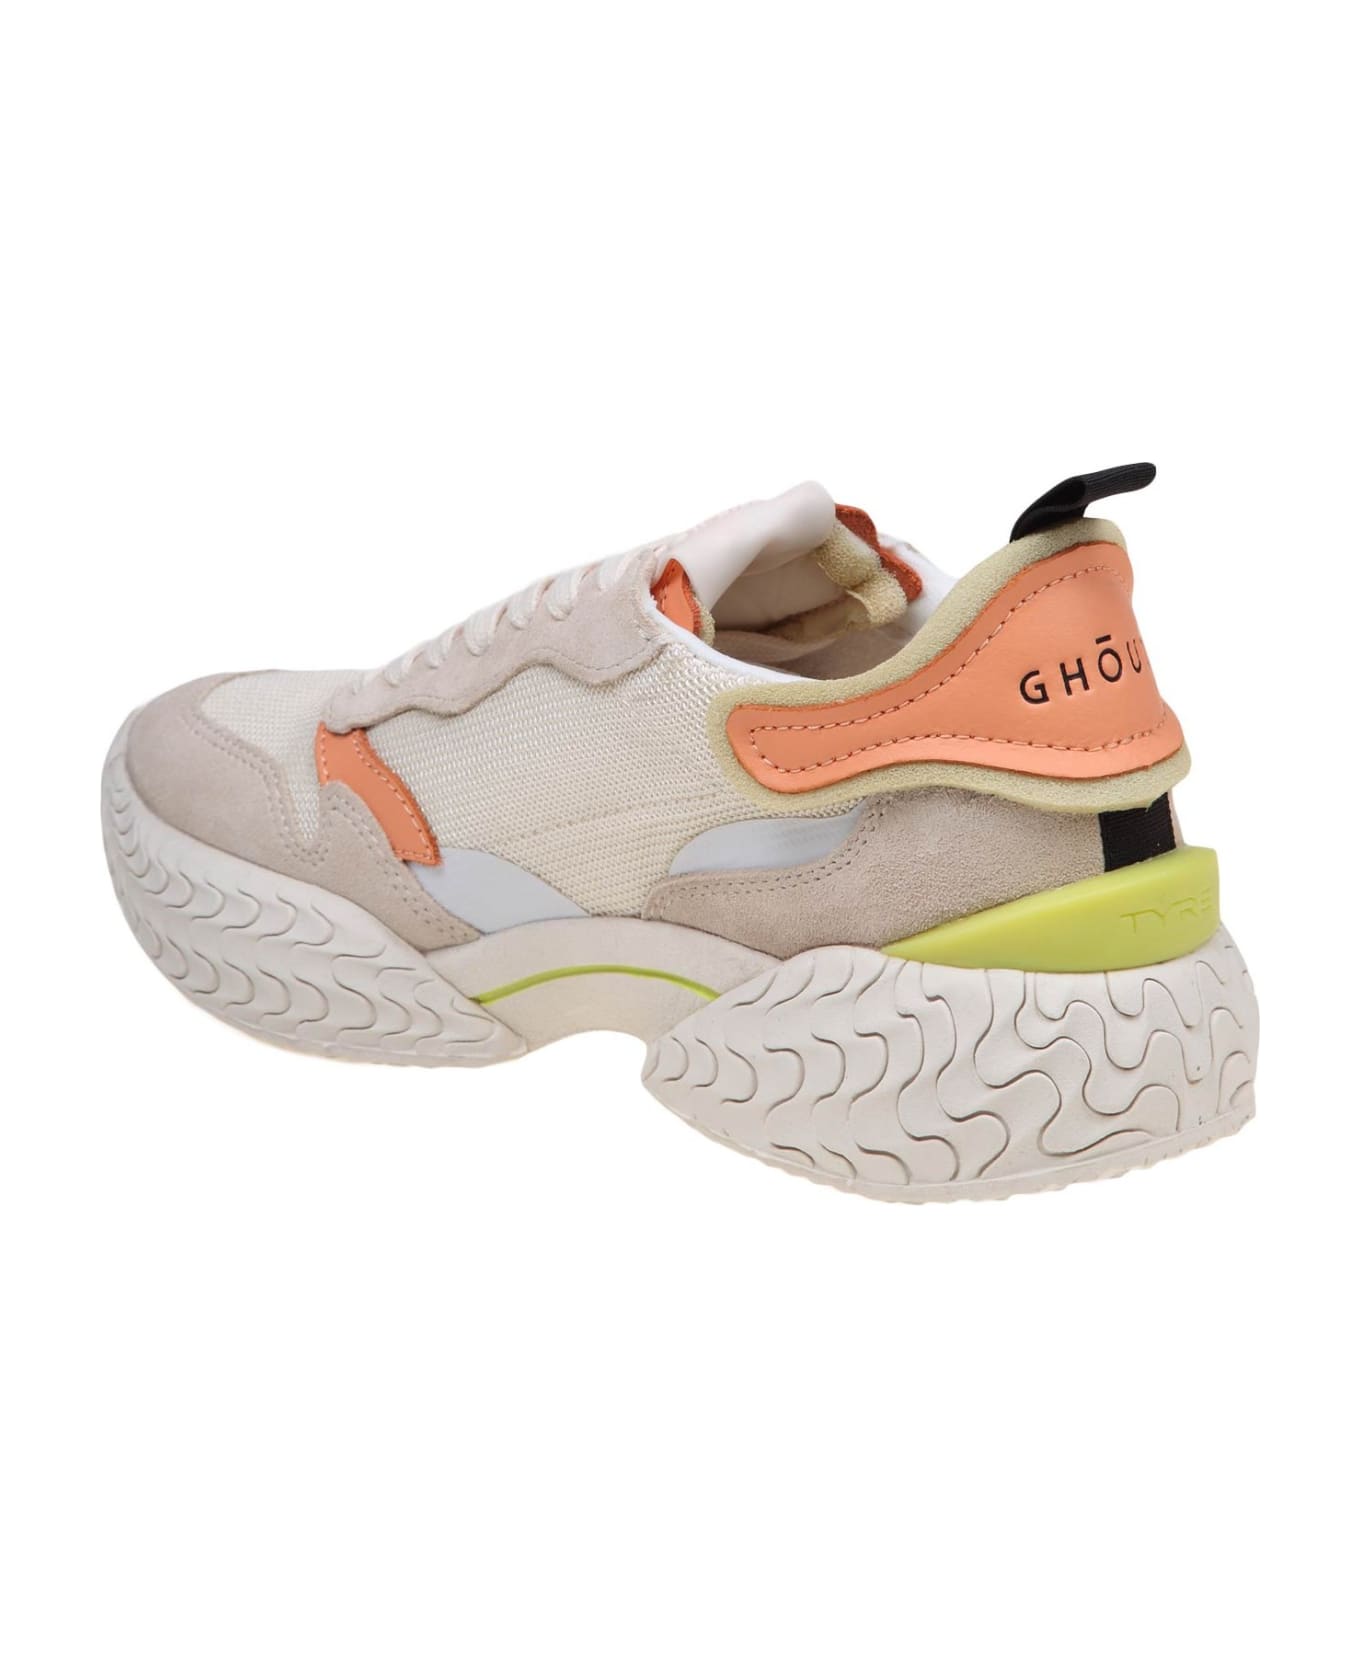 GHOUD Tyre Low Sneakers In Suede And Fabric - LEAT/MESH CREAM/GRN